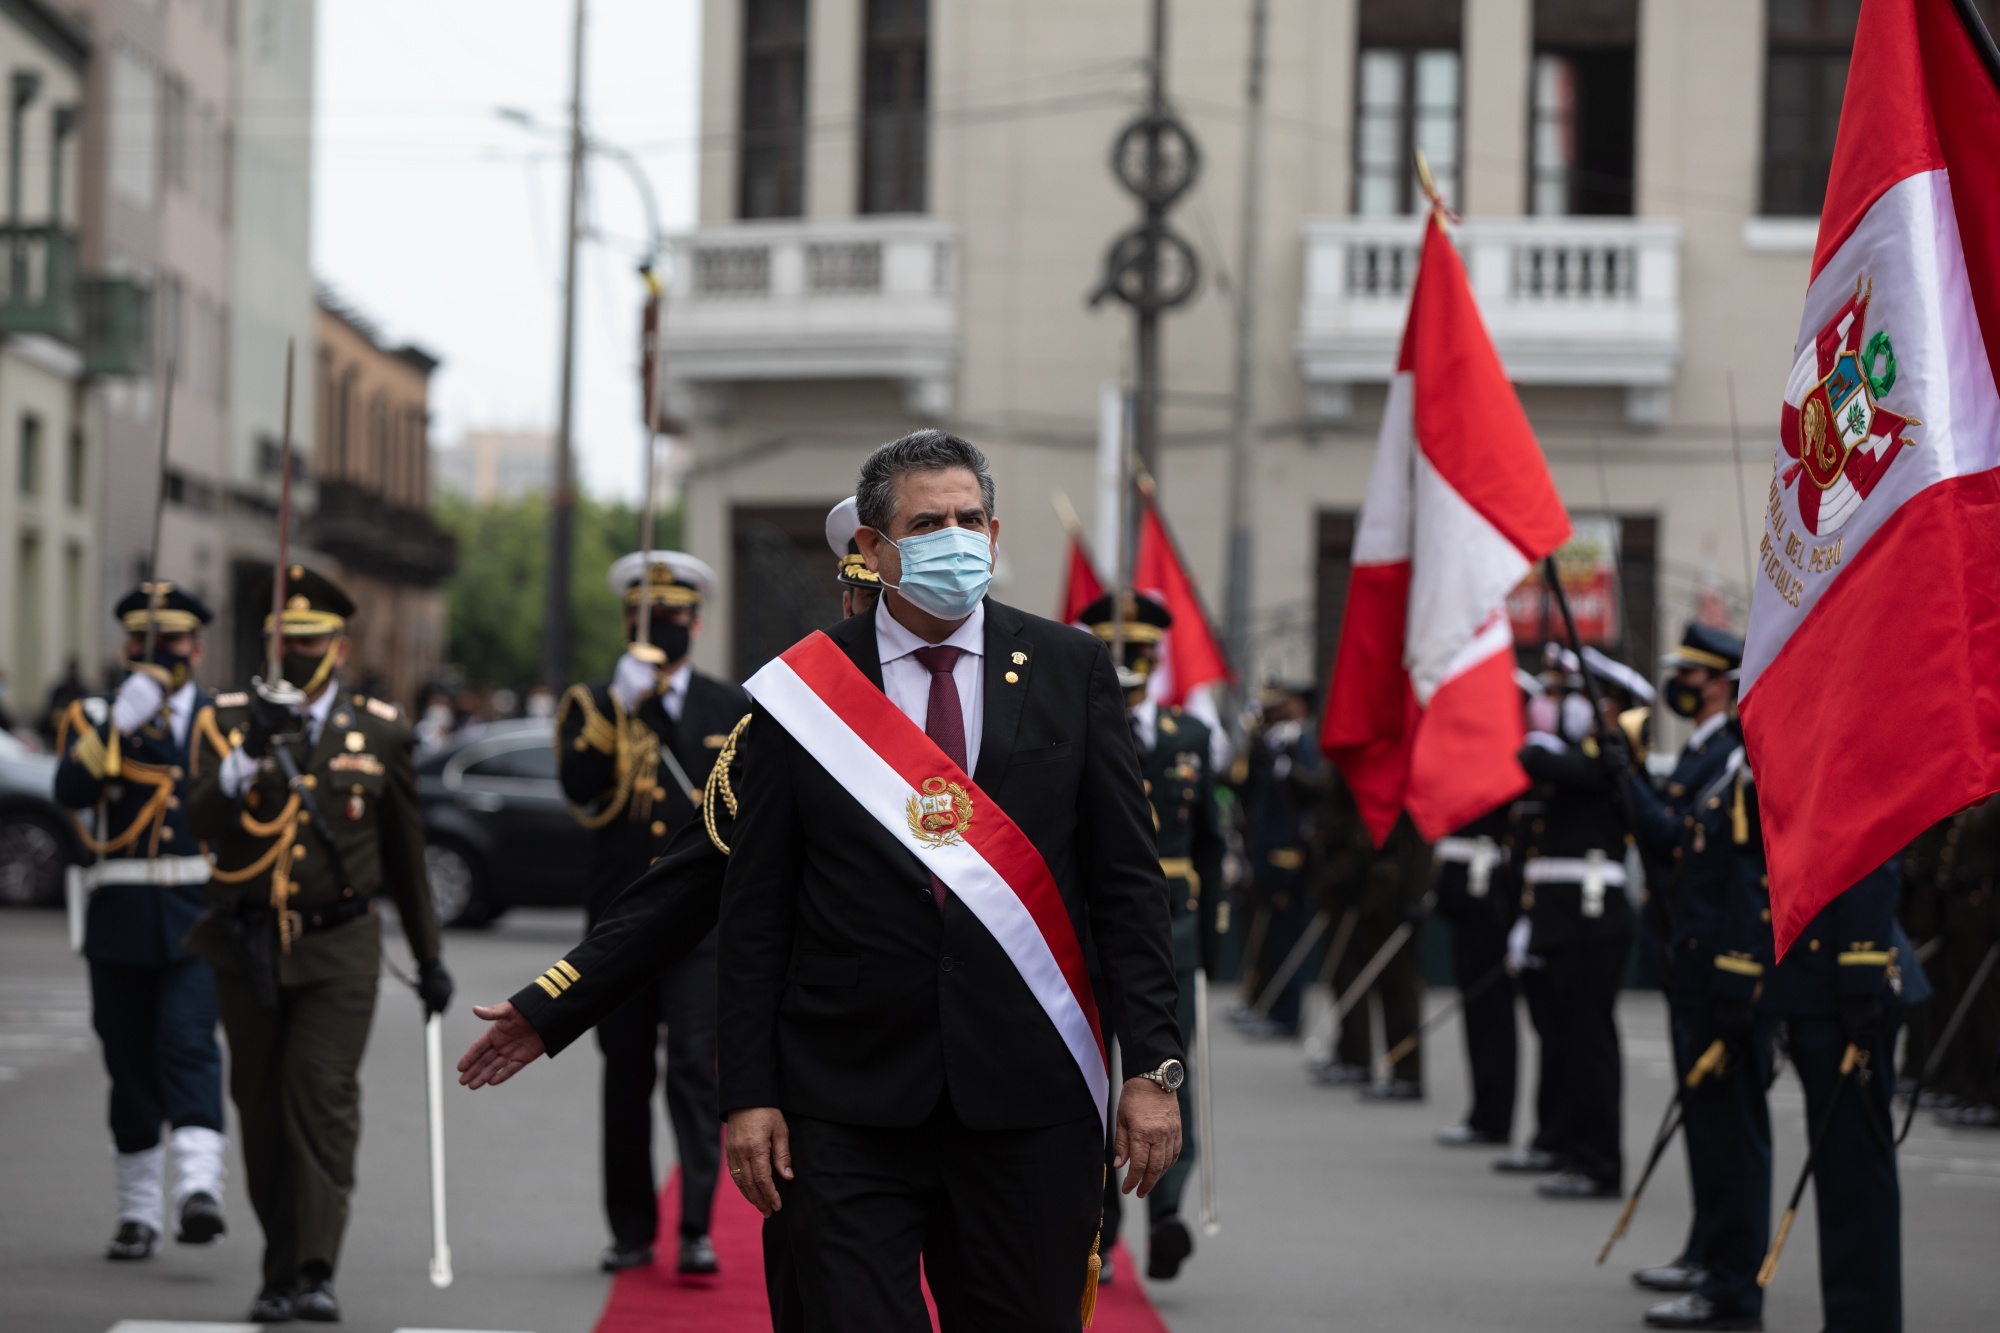 Manuel Merino ahead of a swearing in ceremony in Lima, Peru, on Nov. 10. Merino resigned only five days after taking office.